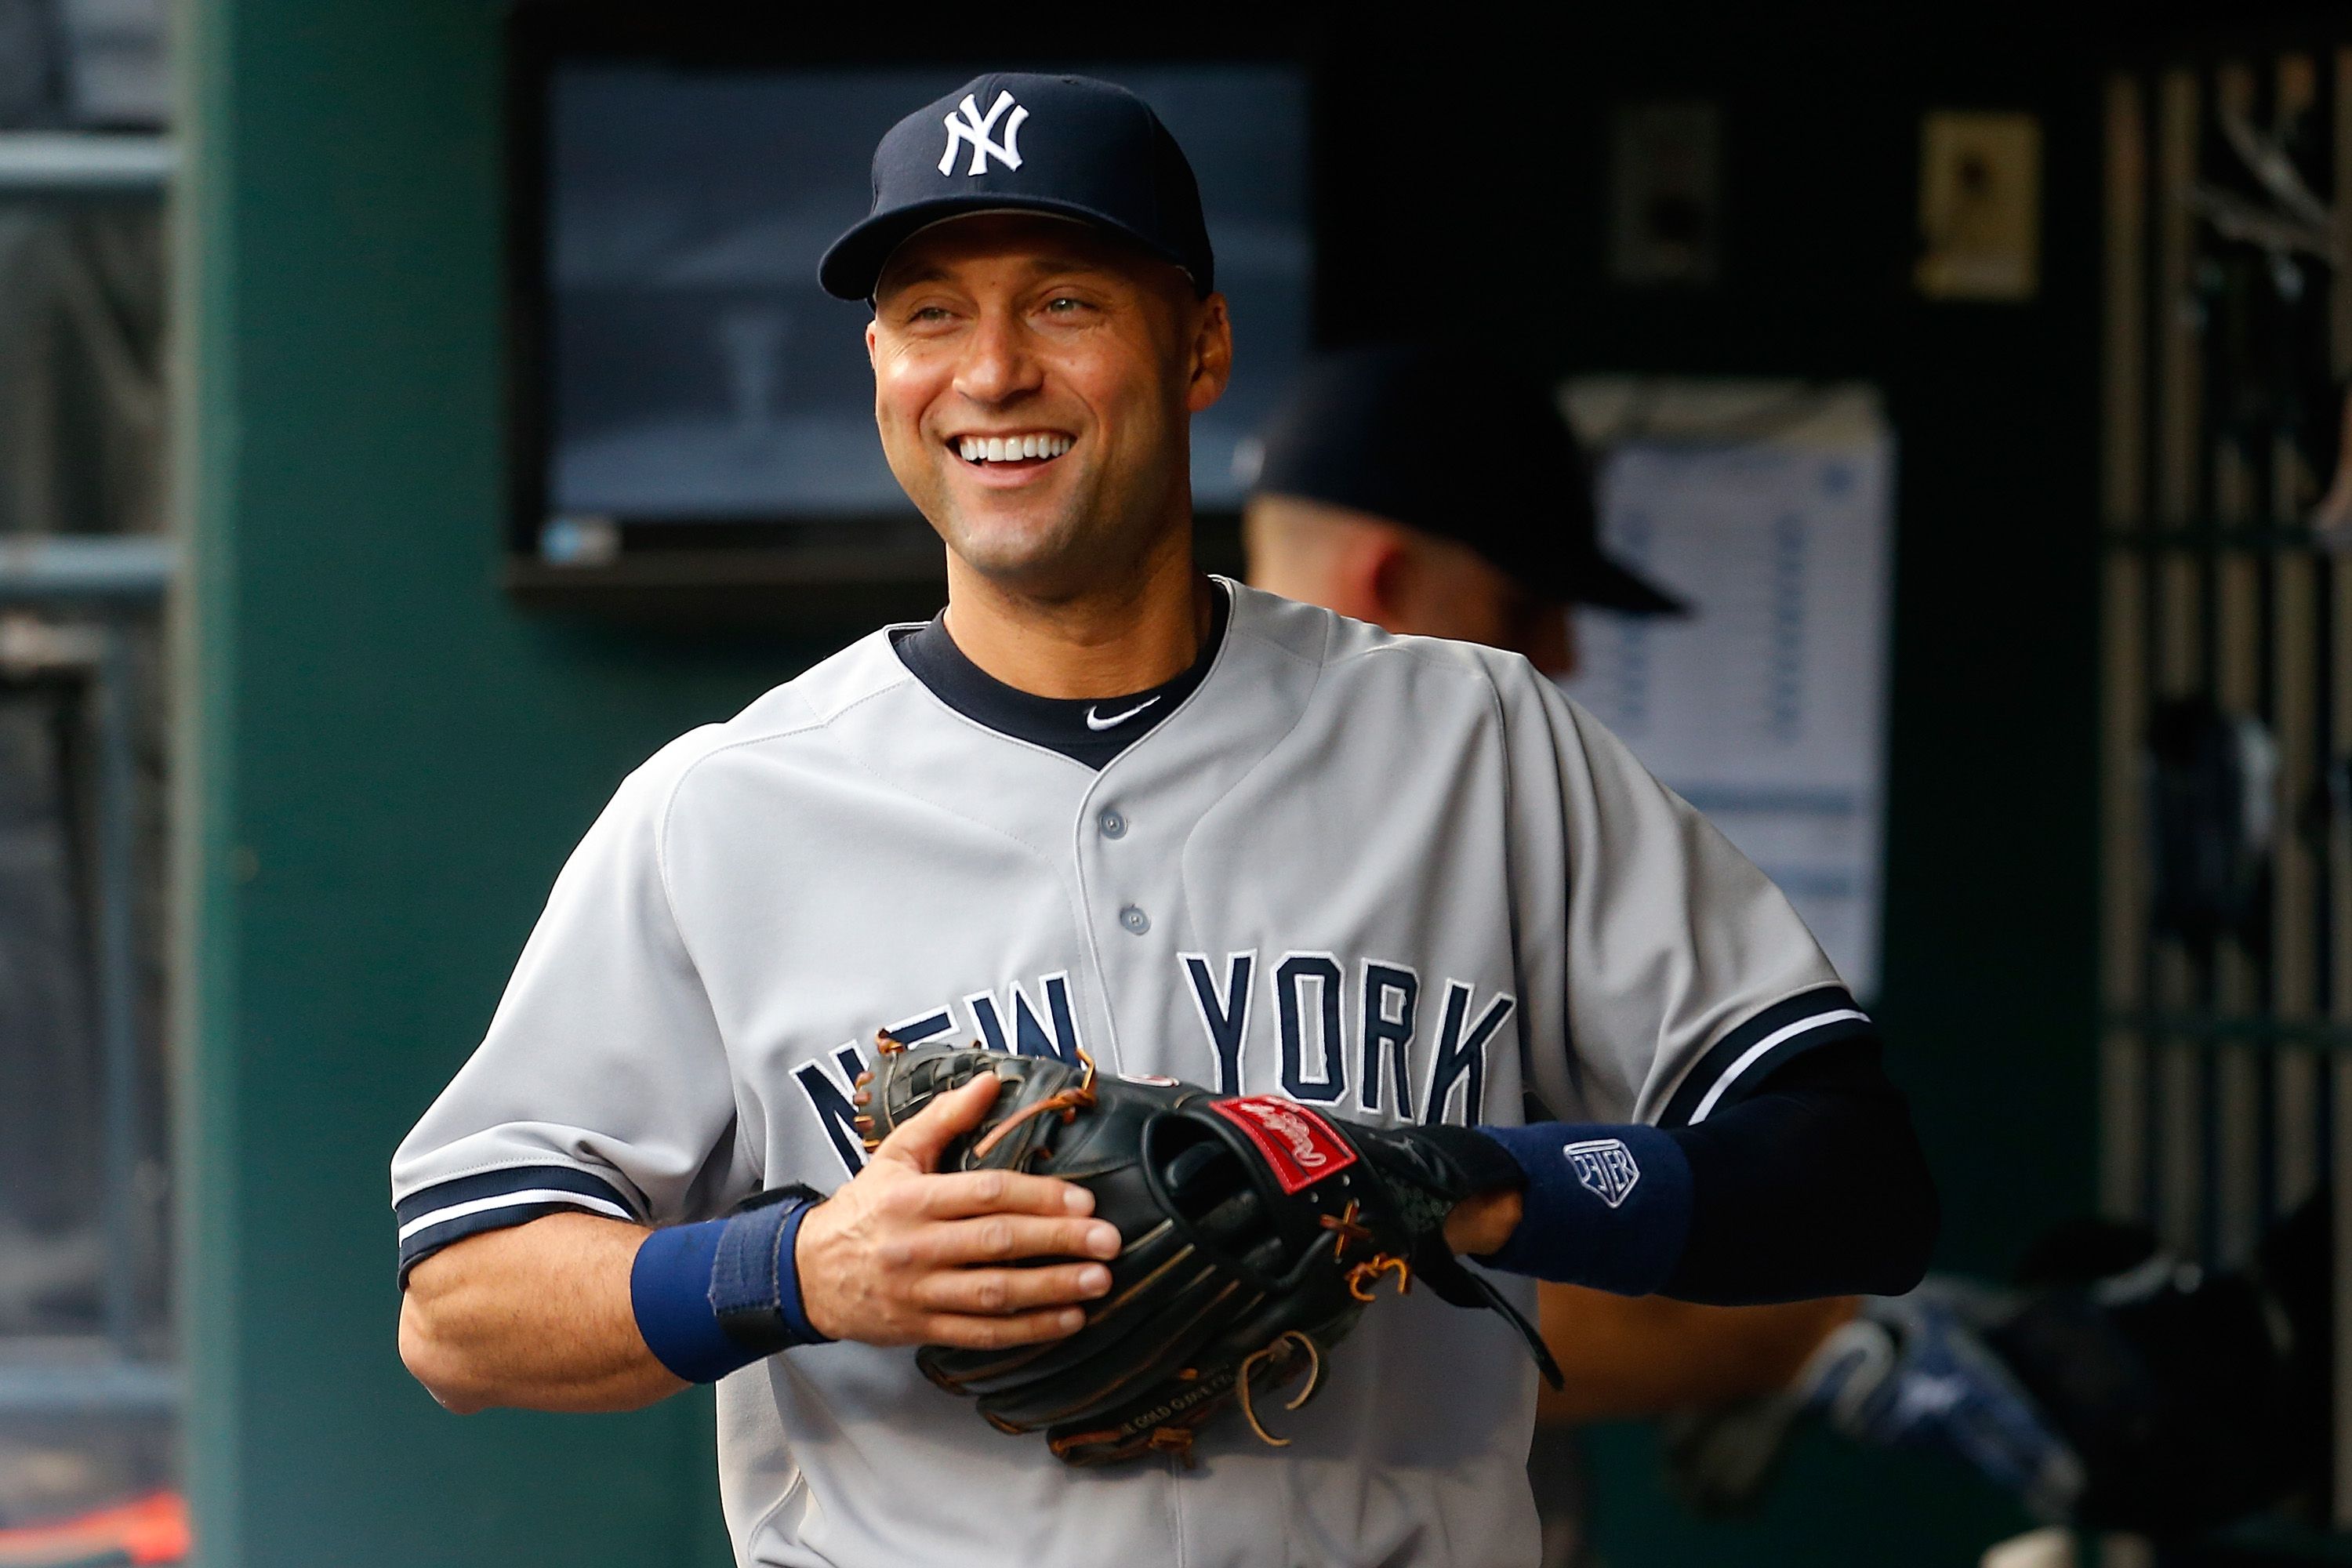 Derek Jeter leads induction class for the National Baseball Hall